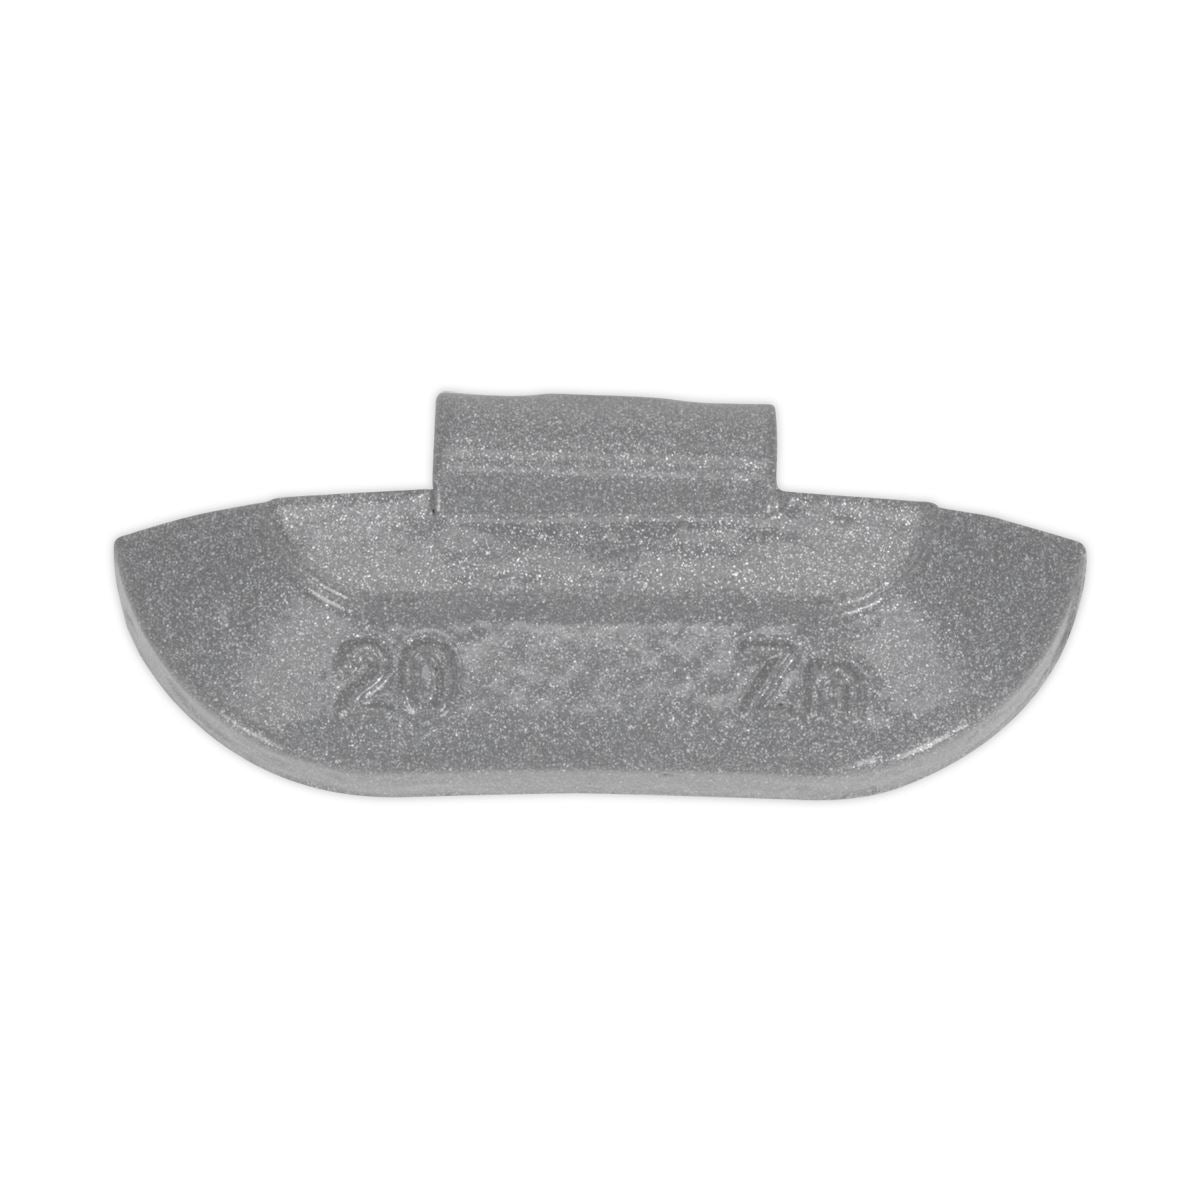 Sealey Wheel Weight 20g Hammer-On Zinc for Steel Wheels Pack of 100